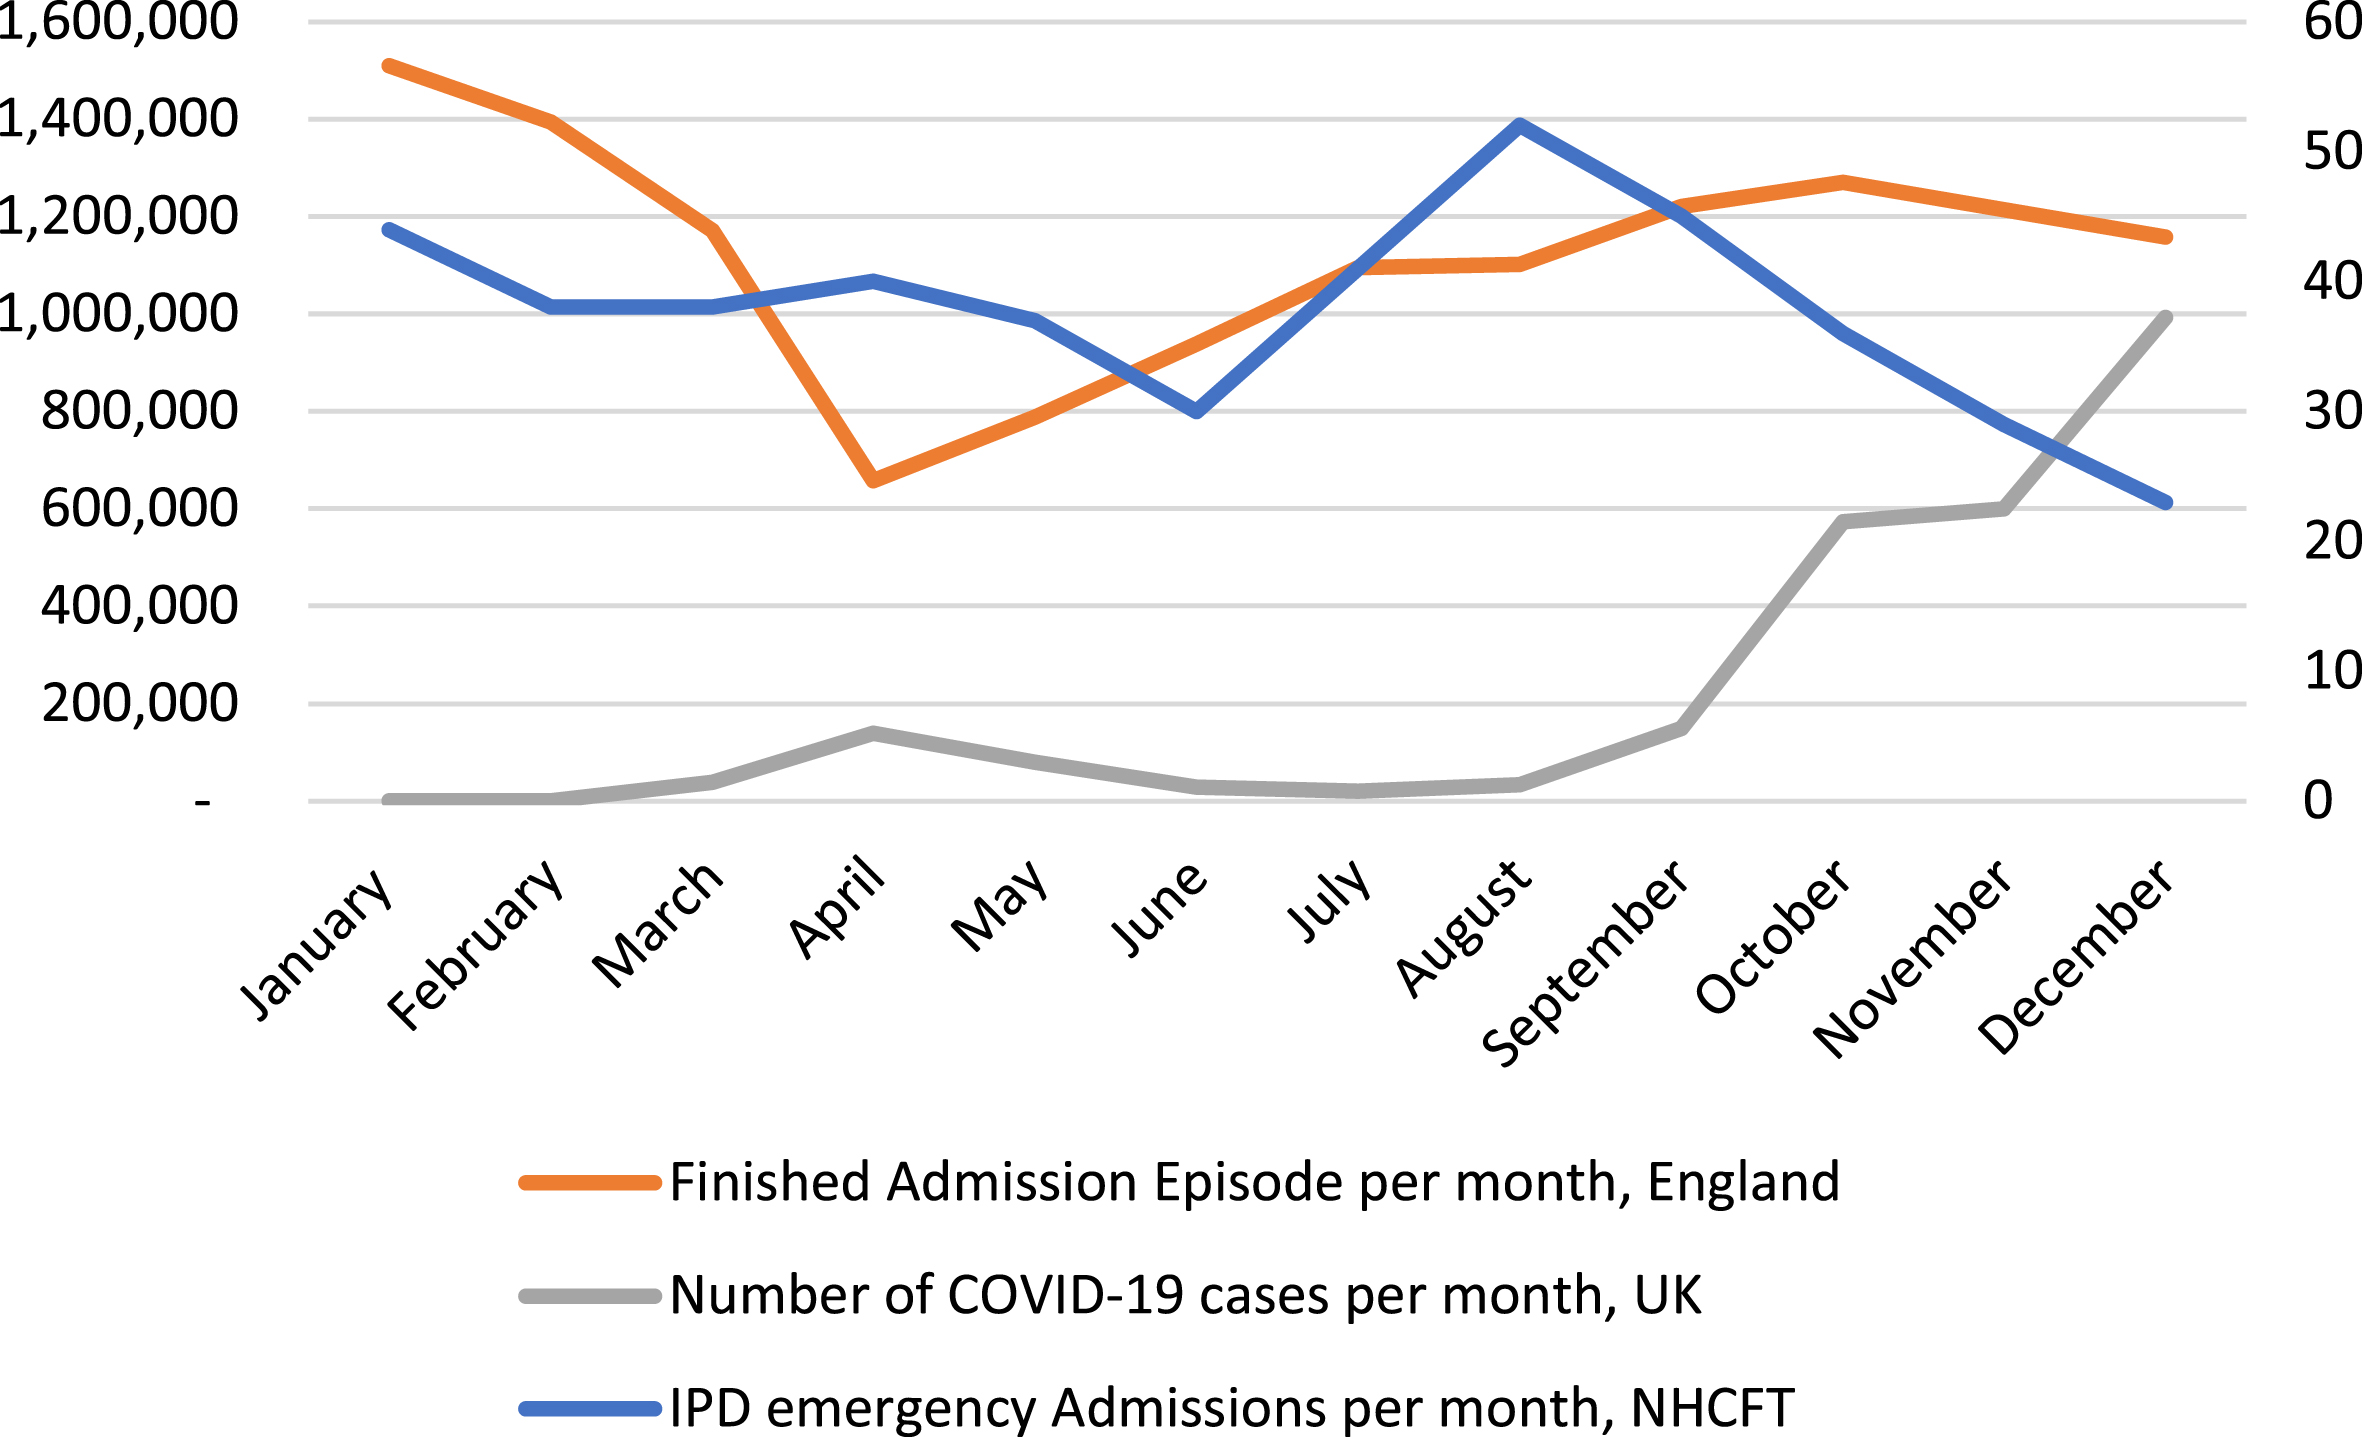 The number of emergency admissions in people with IPD to NHCFT, compared to the number of COVID-19 cases (people who have had at least one positive COVID-19 test result), in the UK by specimen date and the number of finished admission episode (all cause) in England, in 2020.